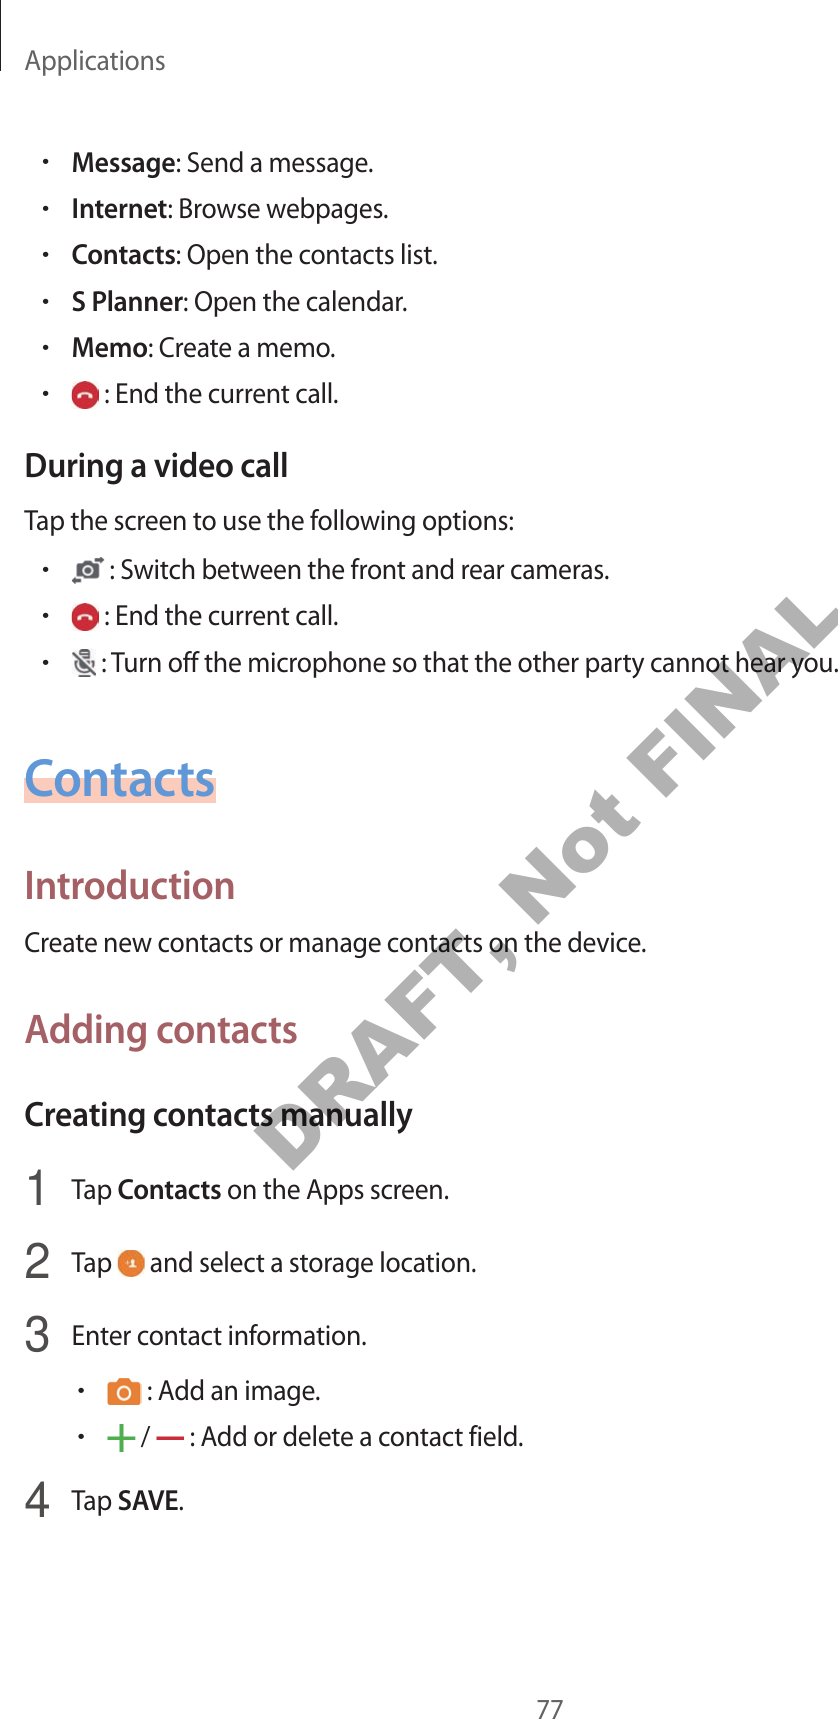 Applications77•Message: Send a message.•Internet: Brow se w ebpages .•Contacts: Open the contacts list.•S Planner: Open the calendar.•Memo: Creat e a memo.• : End the current call .During a video callTap the screen to use the f ollo wing options:• : Switch between the fr on t and r ear cameras .• : End the current call .• : Turn off the microphone so tha t the other party cannot hear you.ContactsIntroductionCreat e new c ontacts or manage contacts on the device.A dding con tactsCrea ting c ontacts manually1  Tap Contacts on the Apps screen.2  Tap   and select a storage location.3  Enter con tact information.• : Add an image .• /   : Add or delet e a con tact field.4  Tap SAVE.DRAFT, Not FINAL